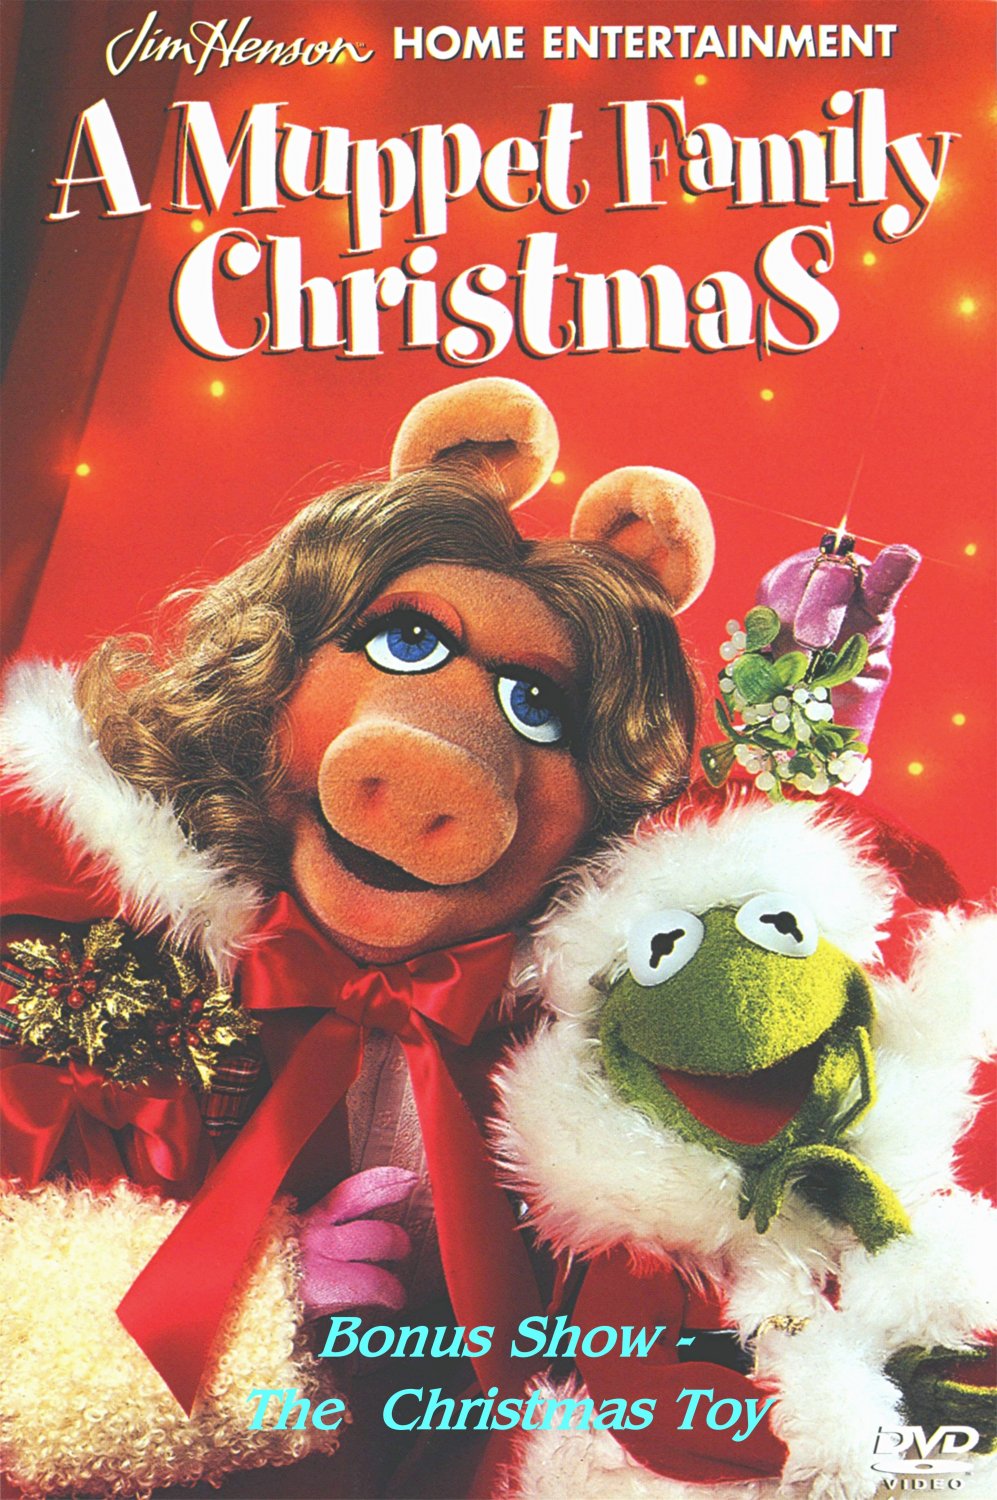 The Muppets DVD - A Muppet Family Christmas + Bonus Show - The Christmas Toy